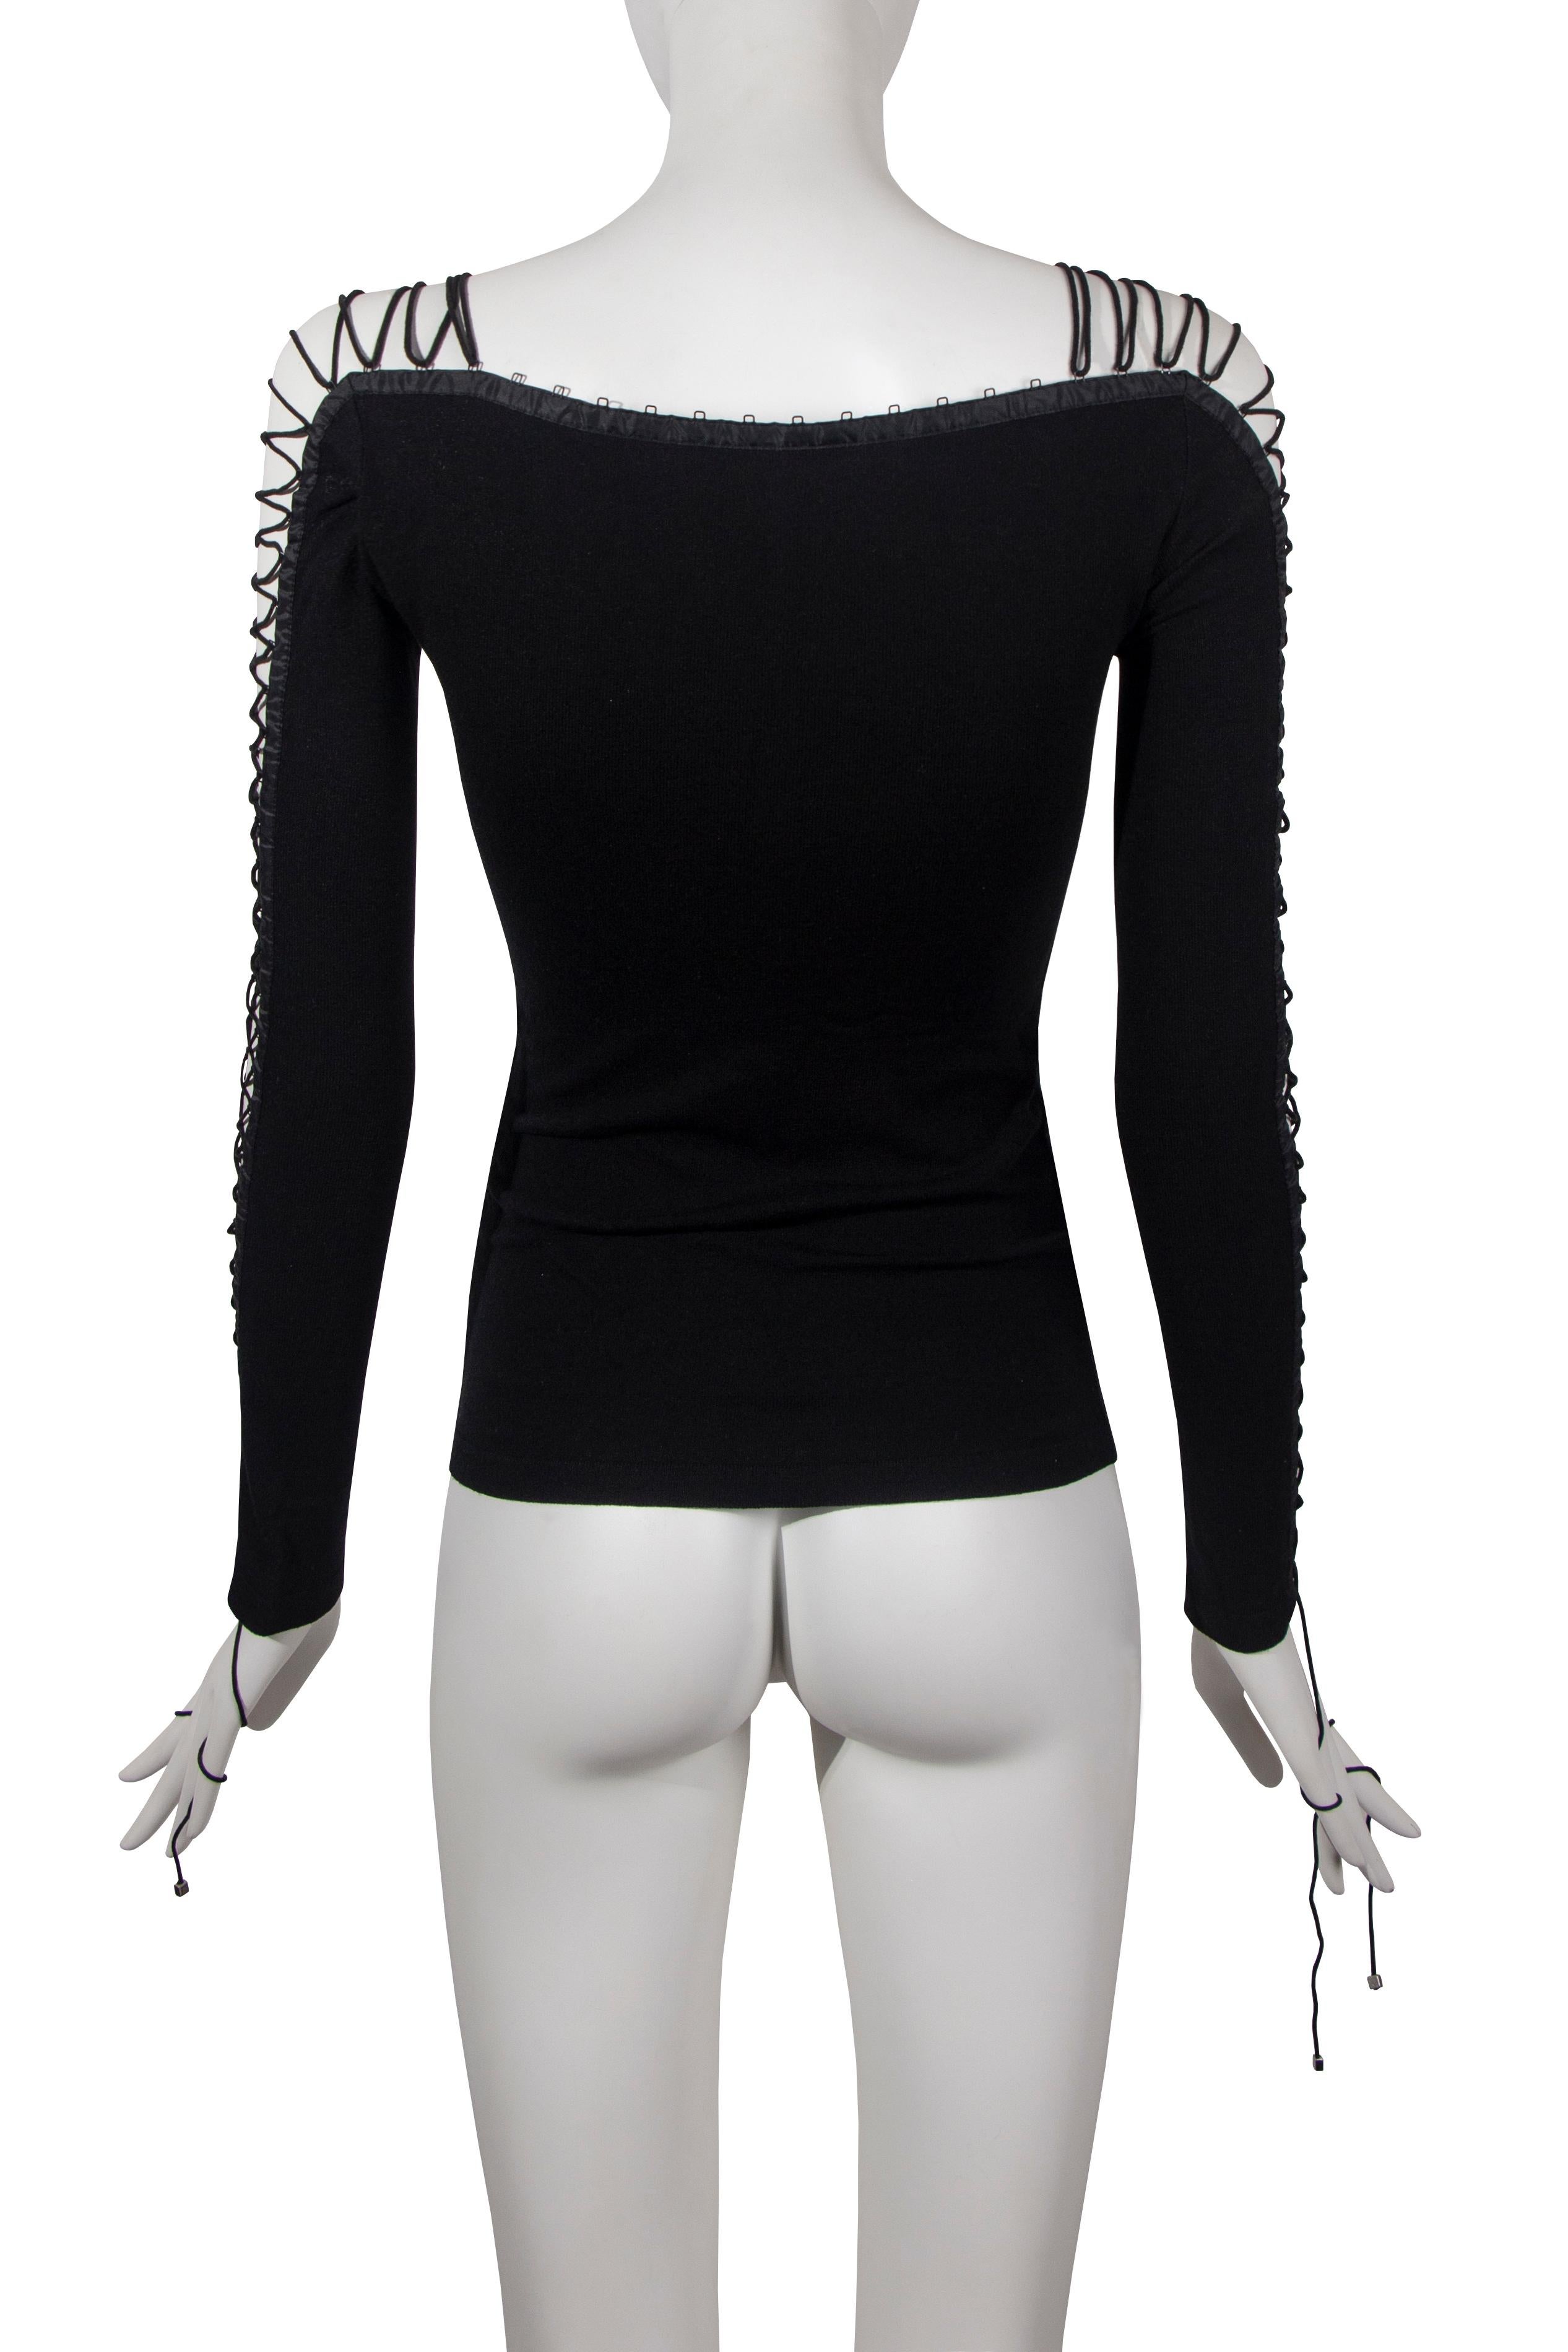 Dolce & Gabbana black lace up top, fw 2003 For Sale 5